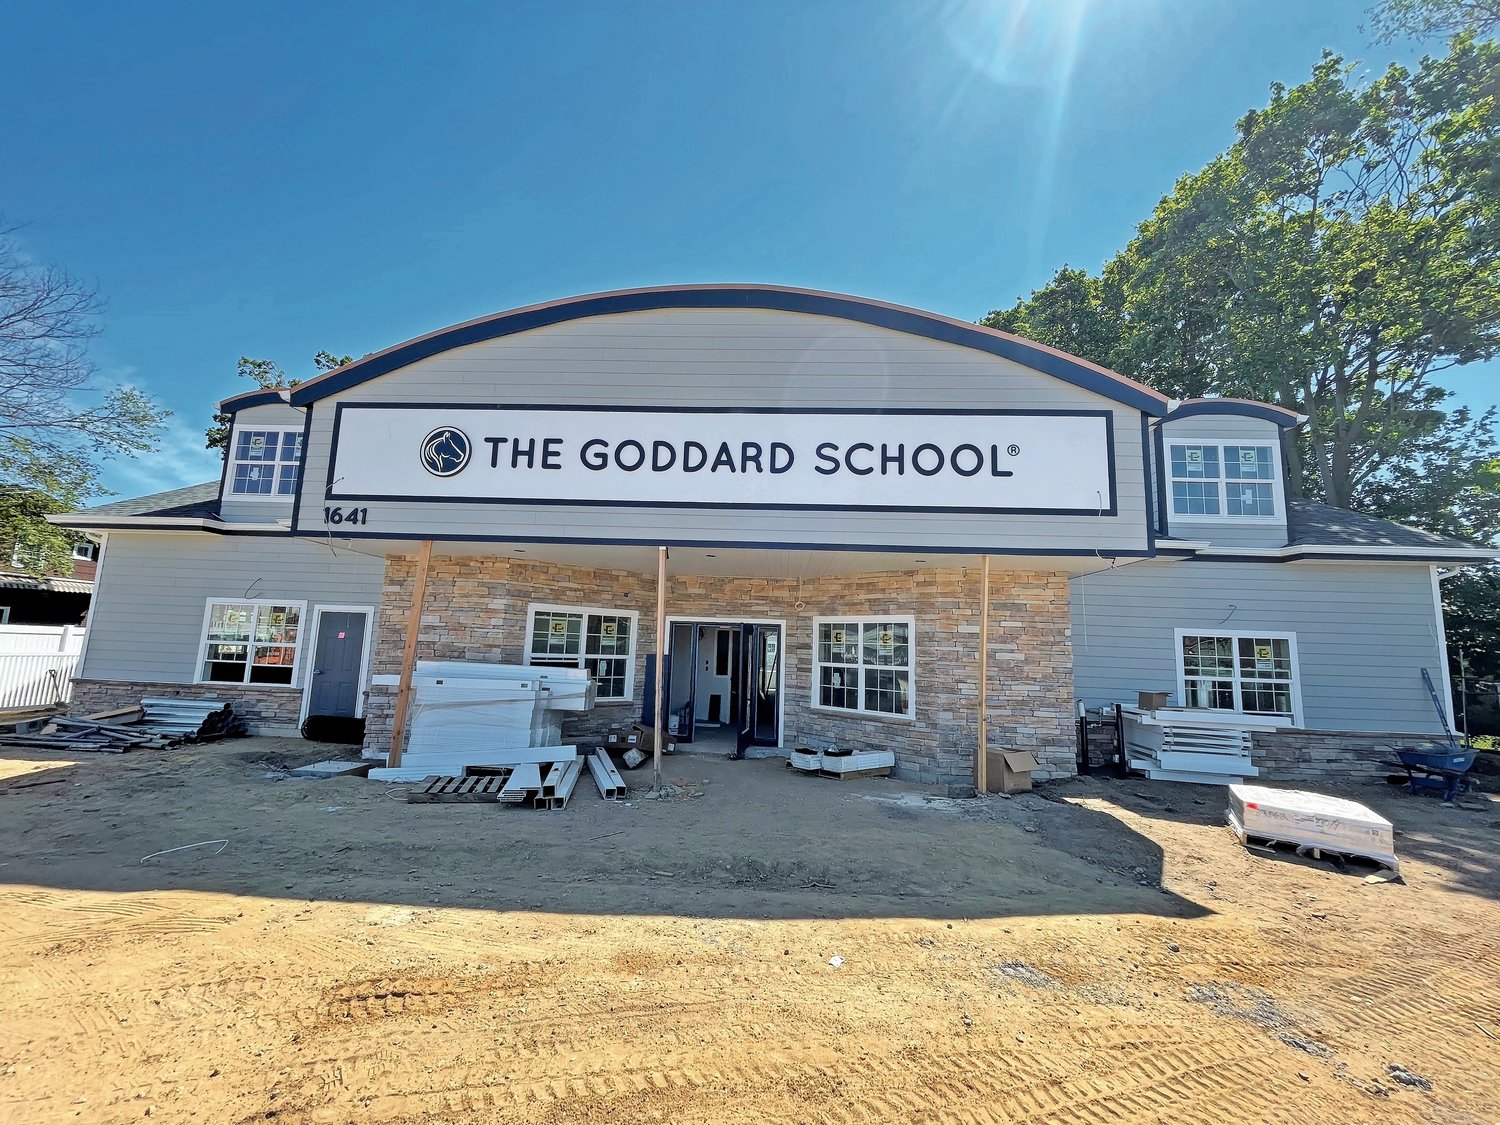 Construction of The Goddard School in North Bellmore is nearing completion.